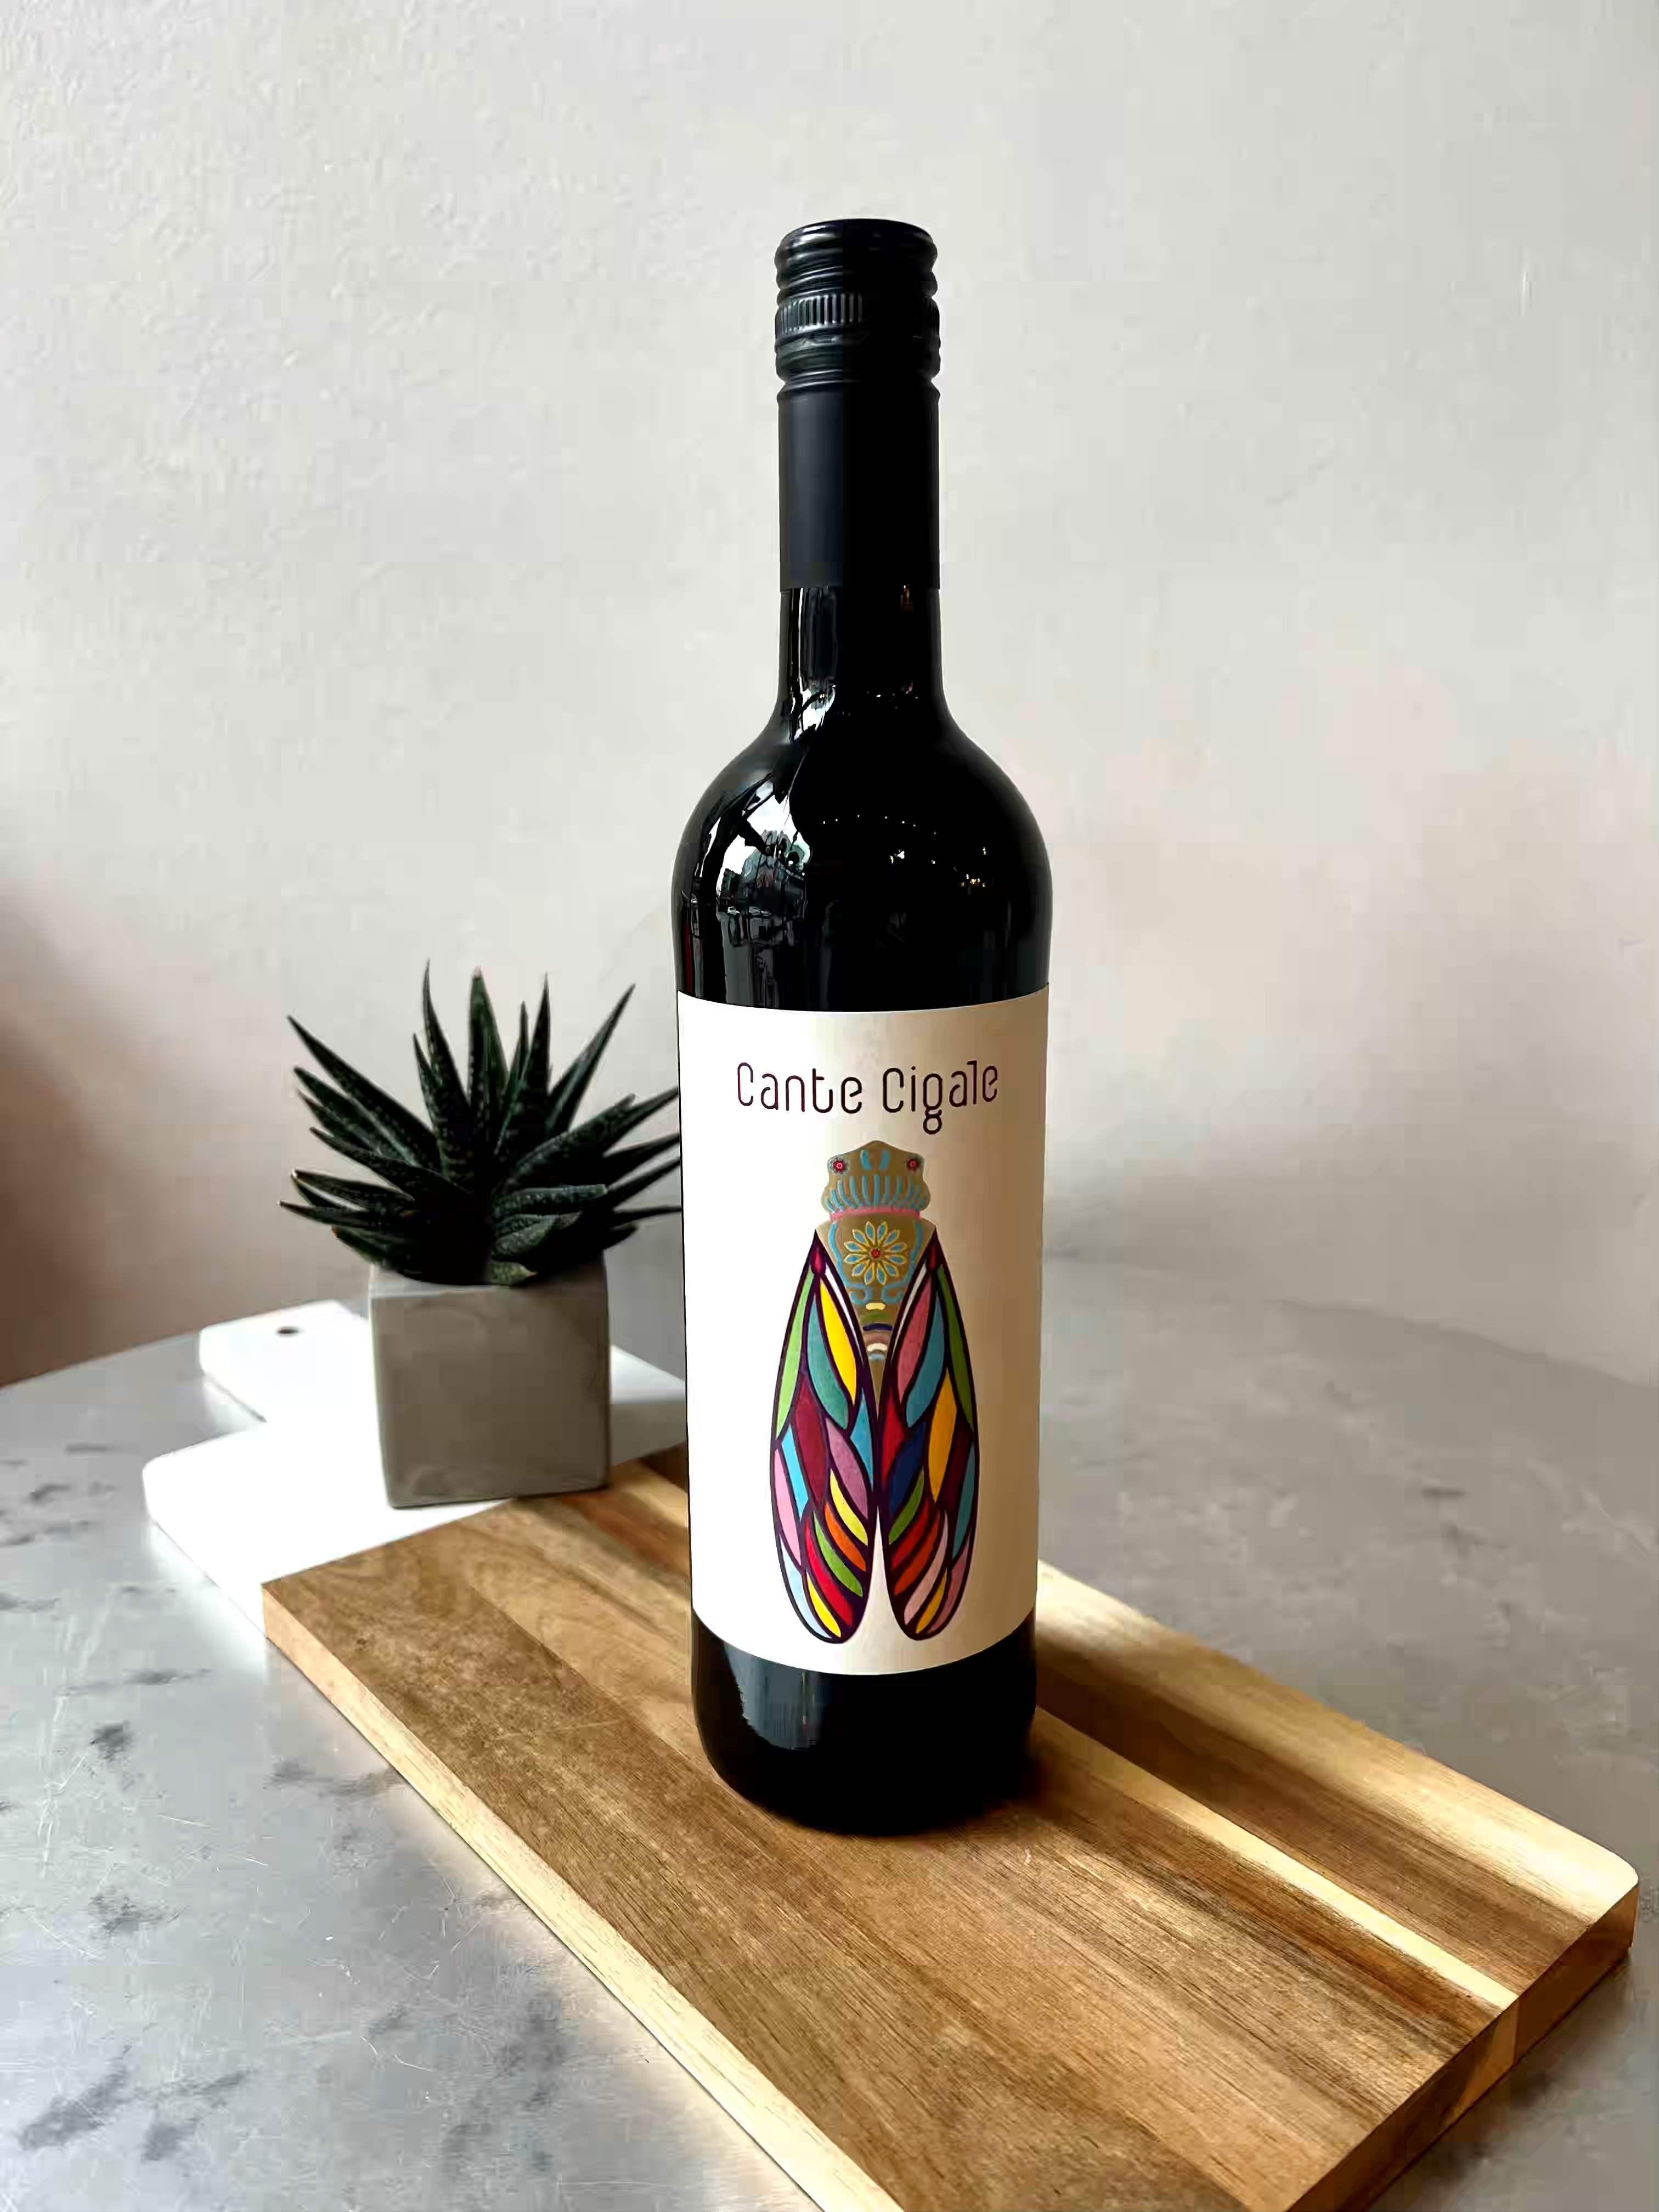 Cante Cigale Red Blend 2021 France